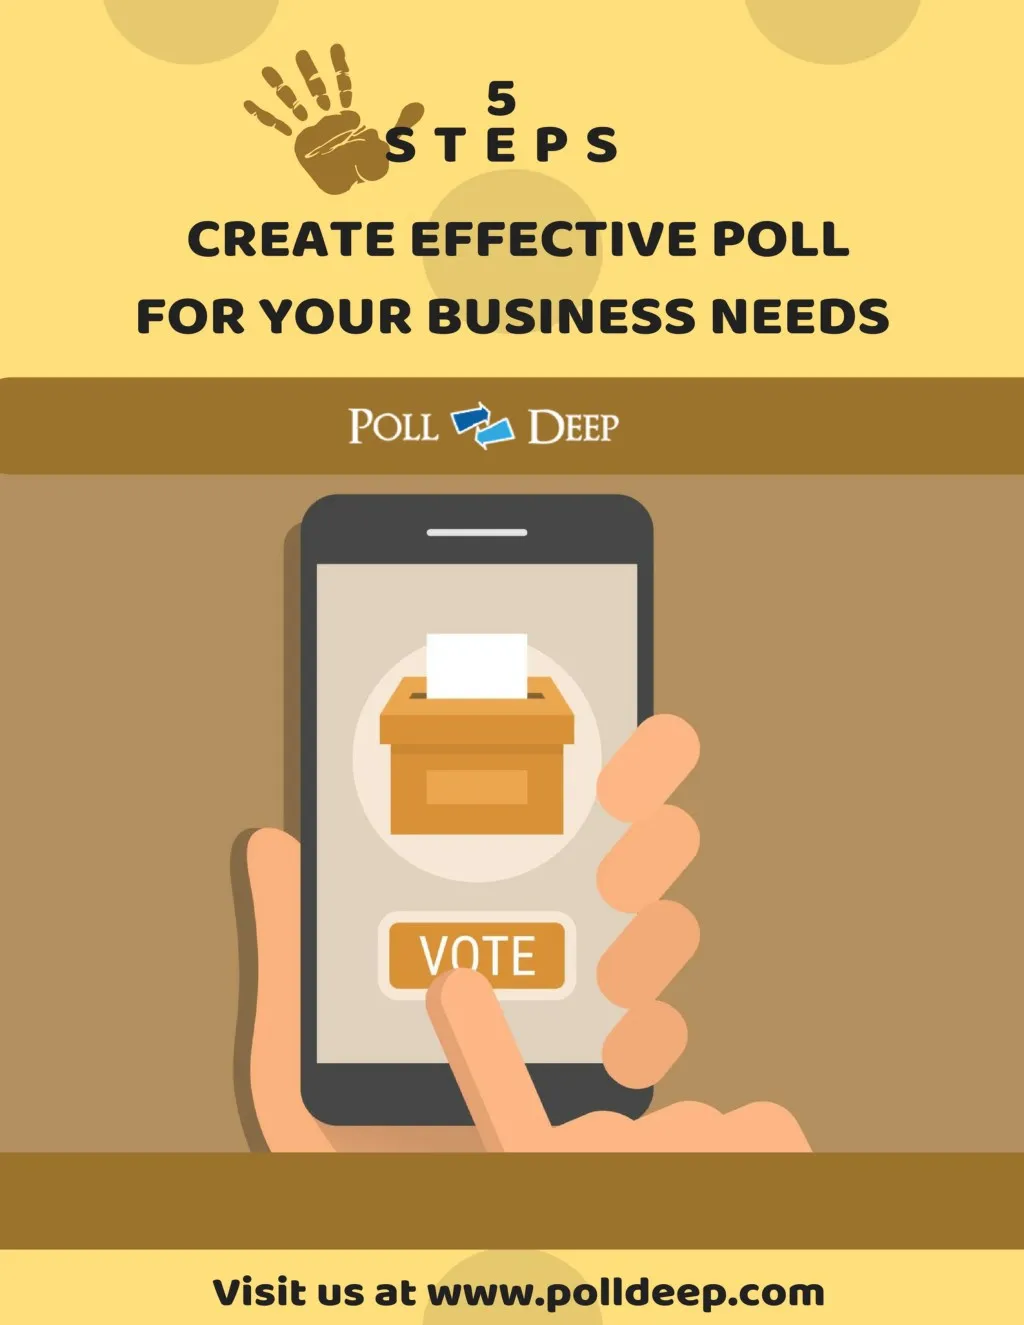 5 steps you need to create effective poll